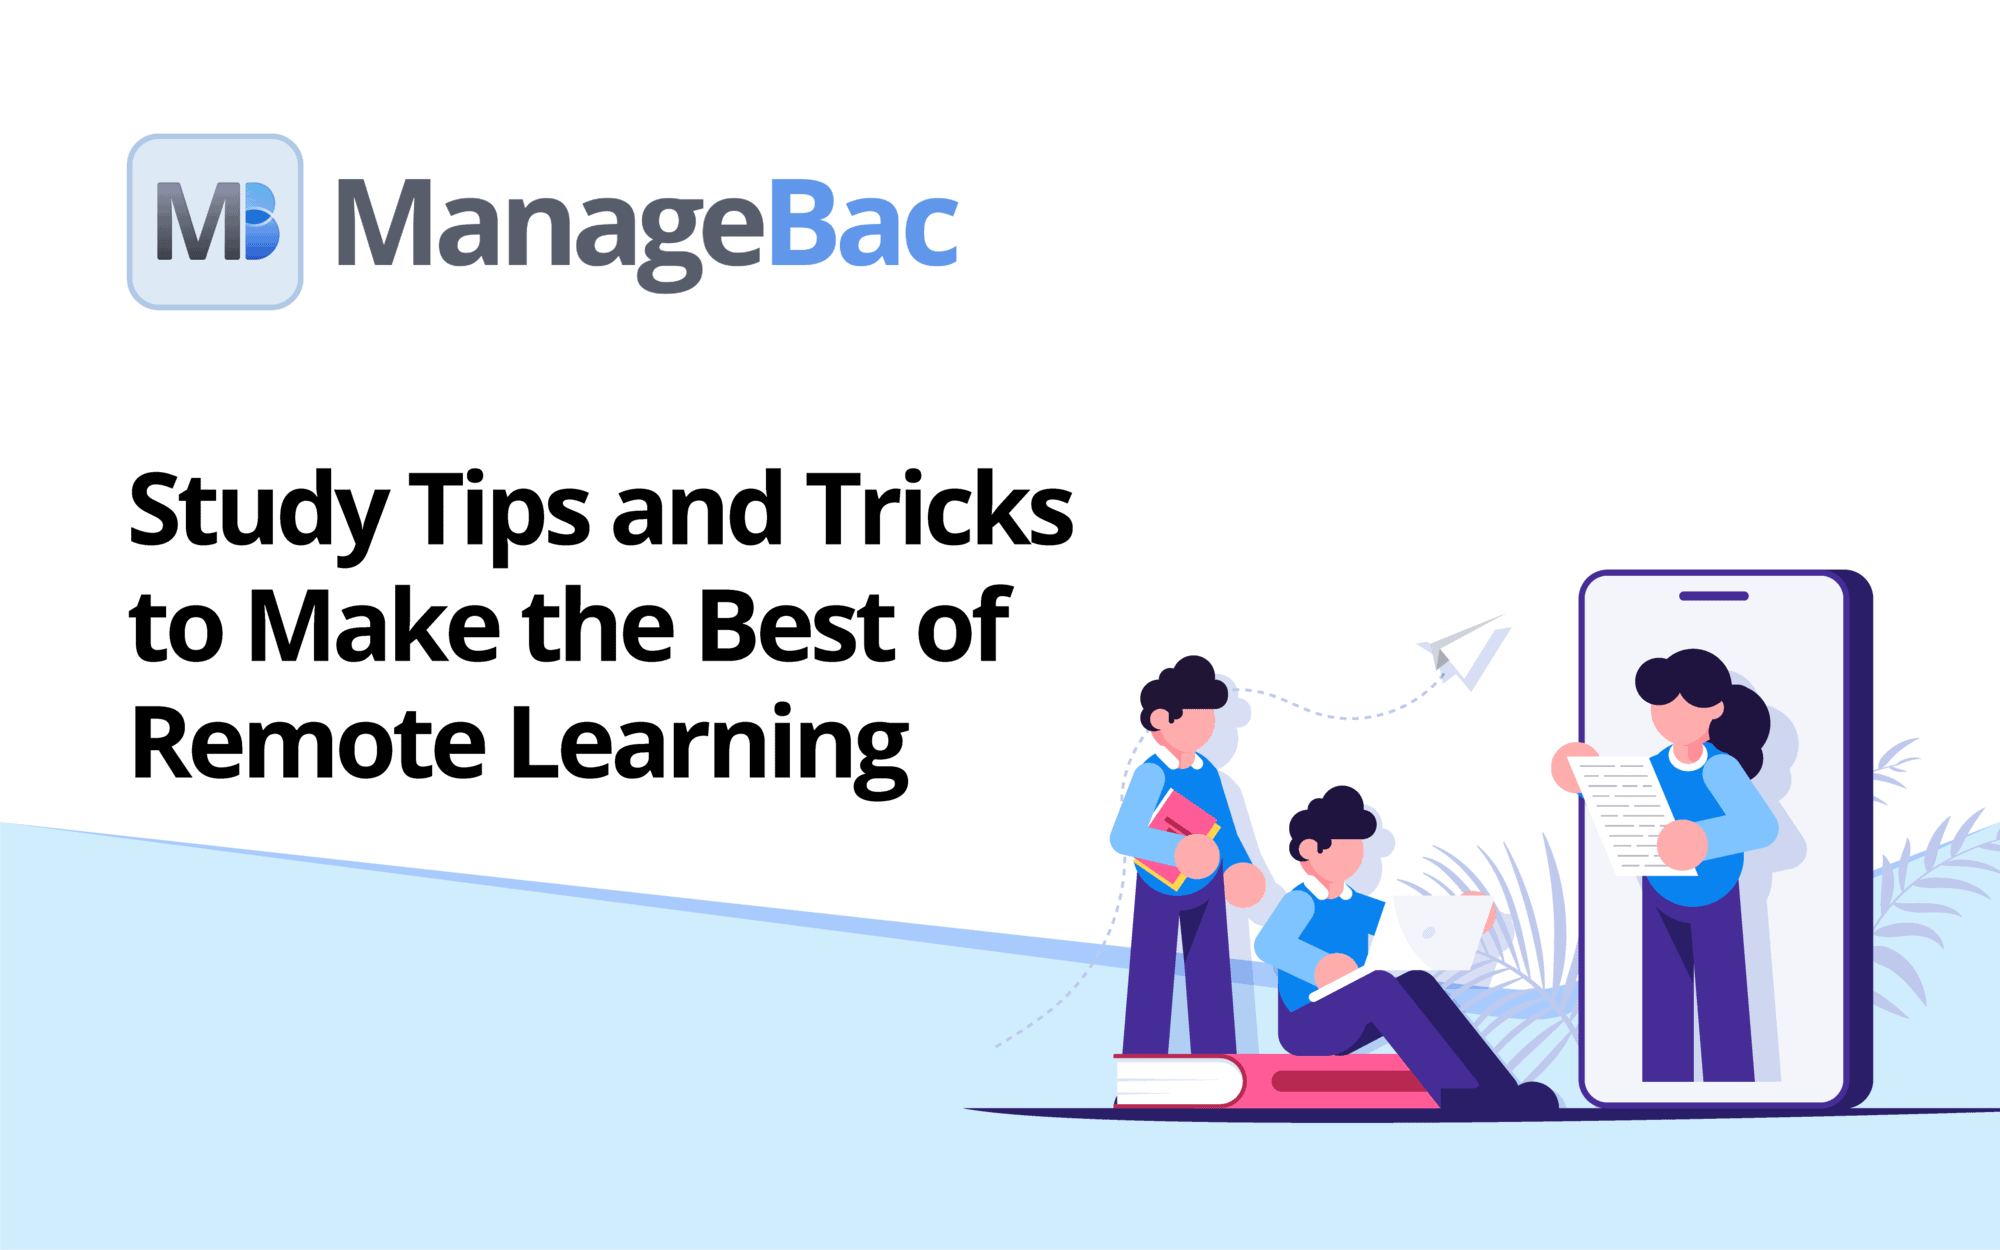 Study Tips and Tricks to Make the Best of Remote Learning